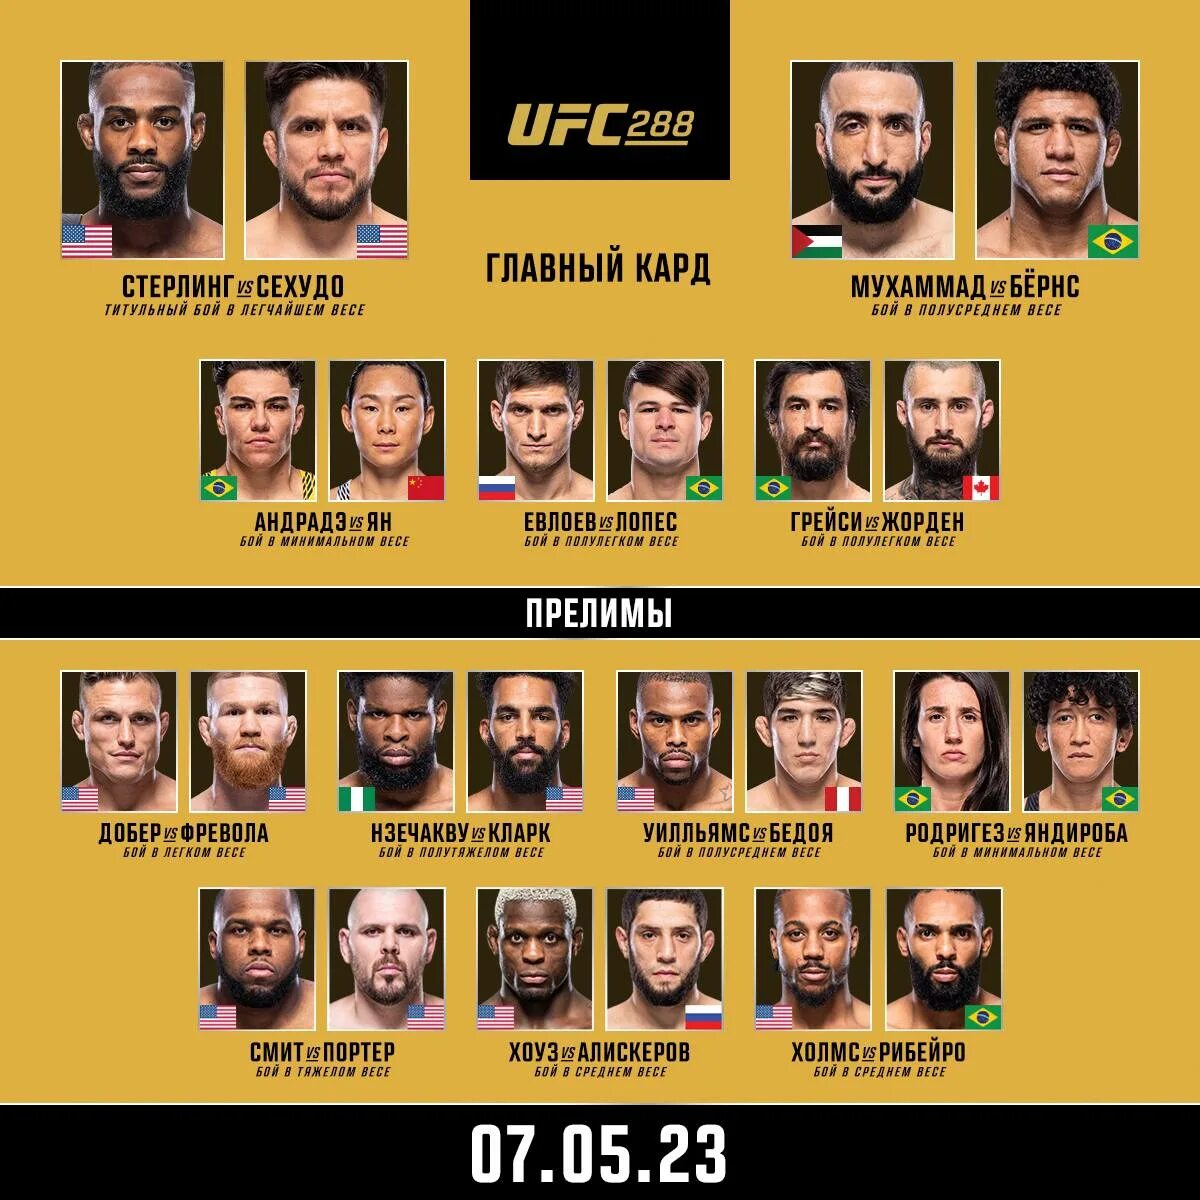 Ufc298. Юфс 289 кард. Юфс 288 кард. Кард юфс 288 кард участников. Юфс 298 кард участников.